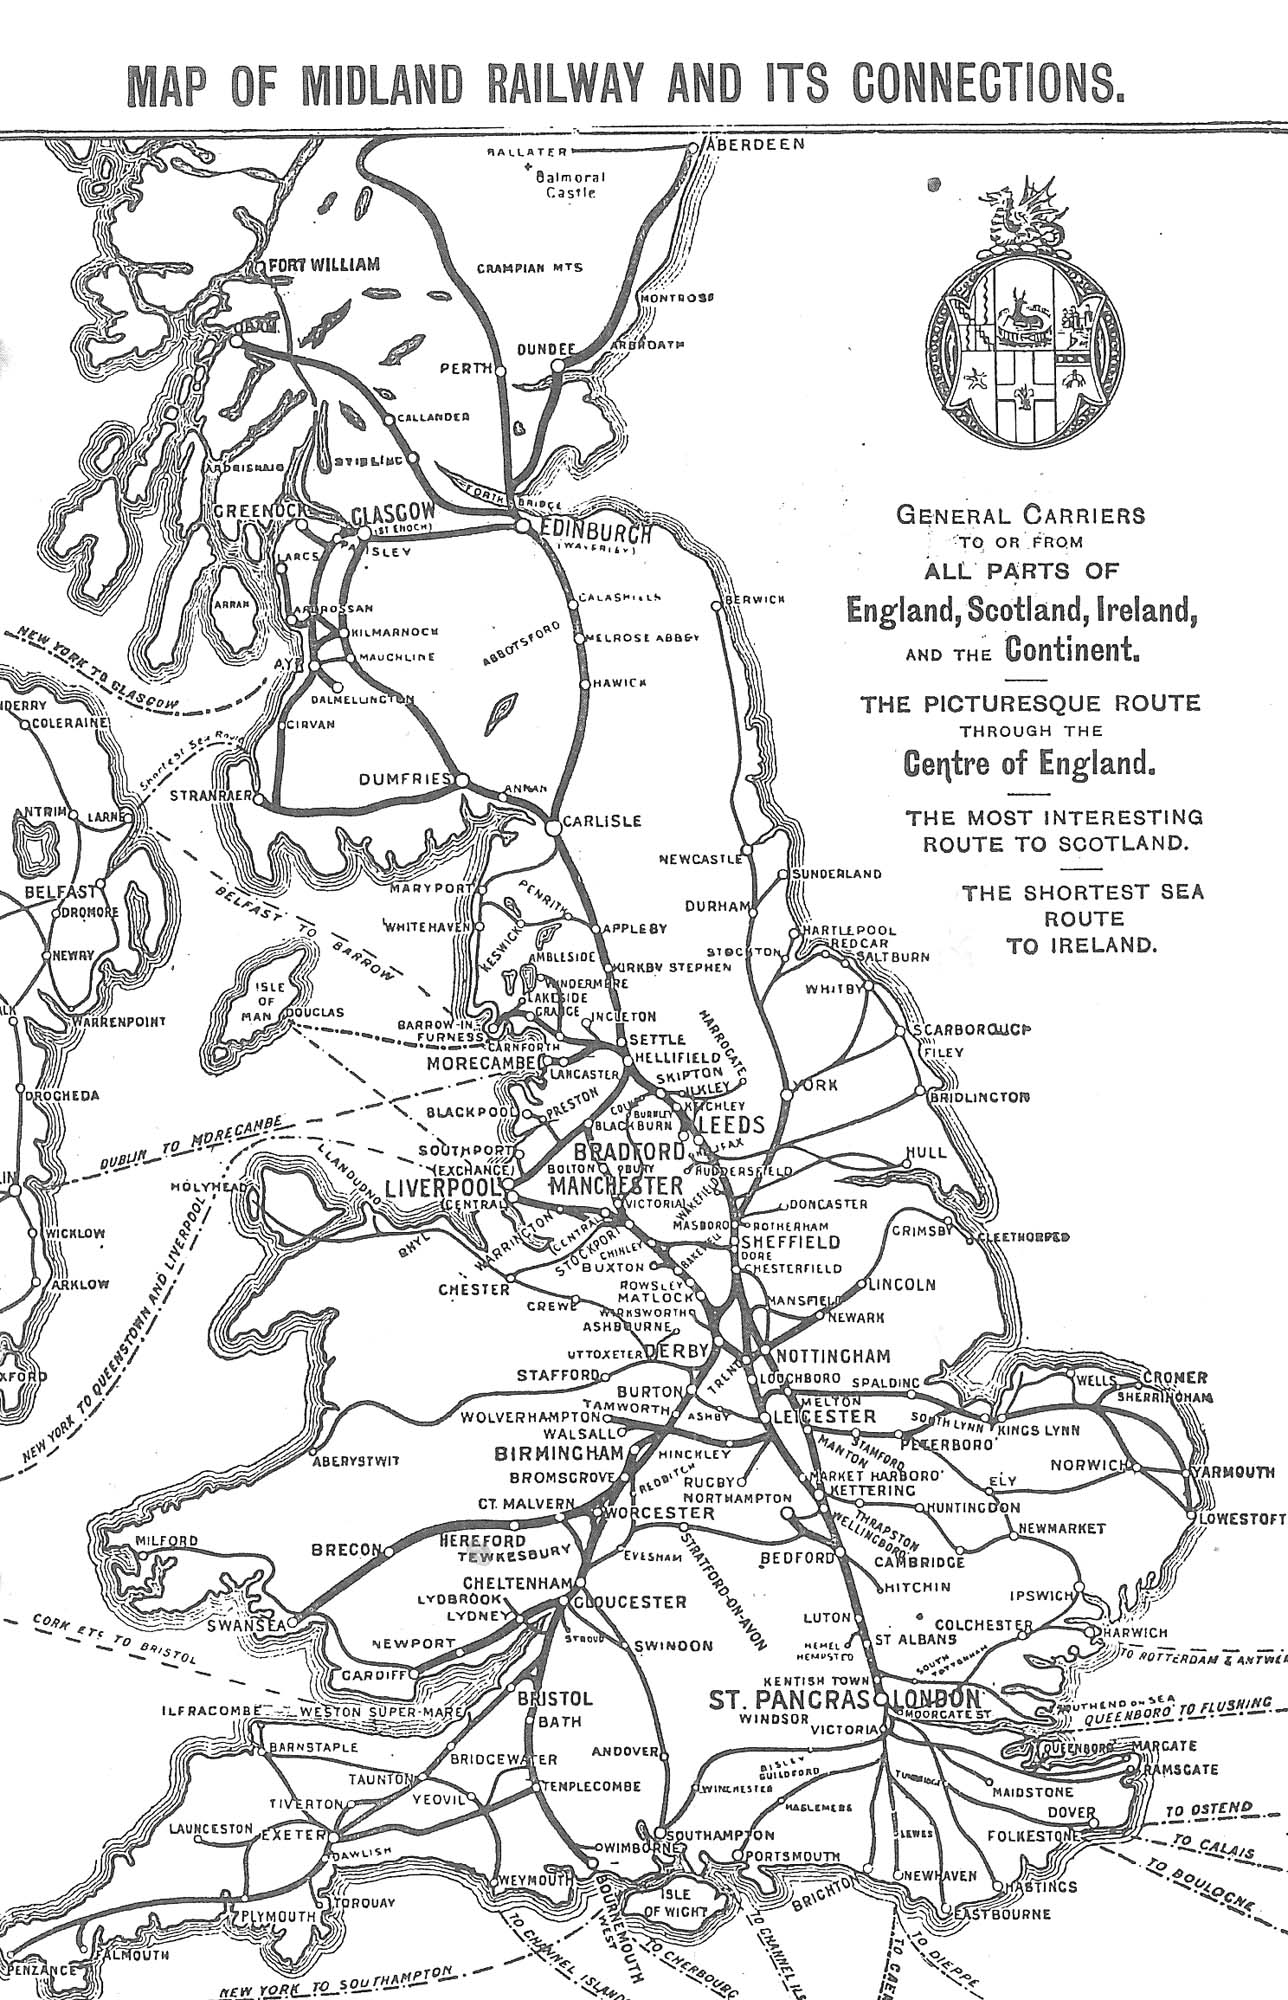 Map showing the Midland Railway connections, 1897 - 